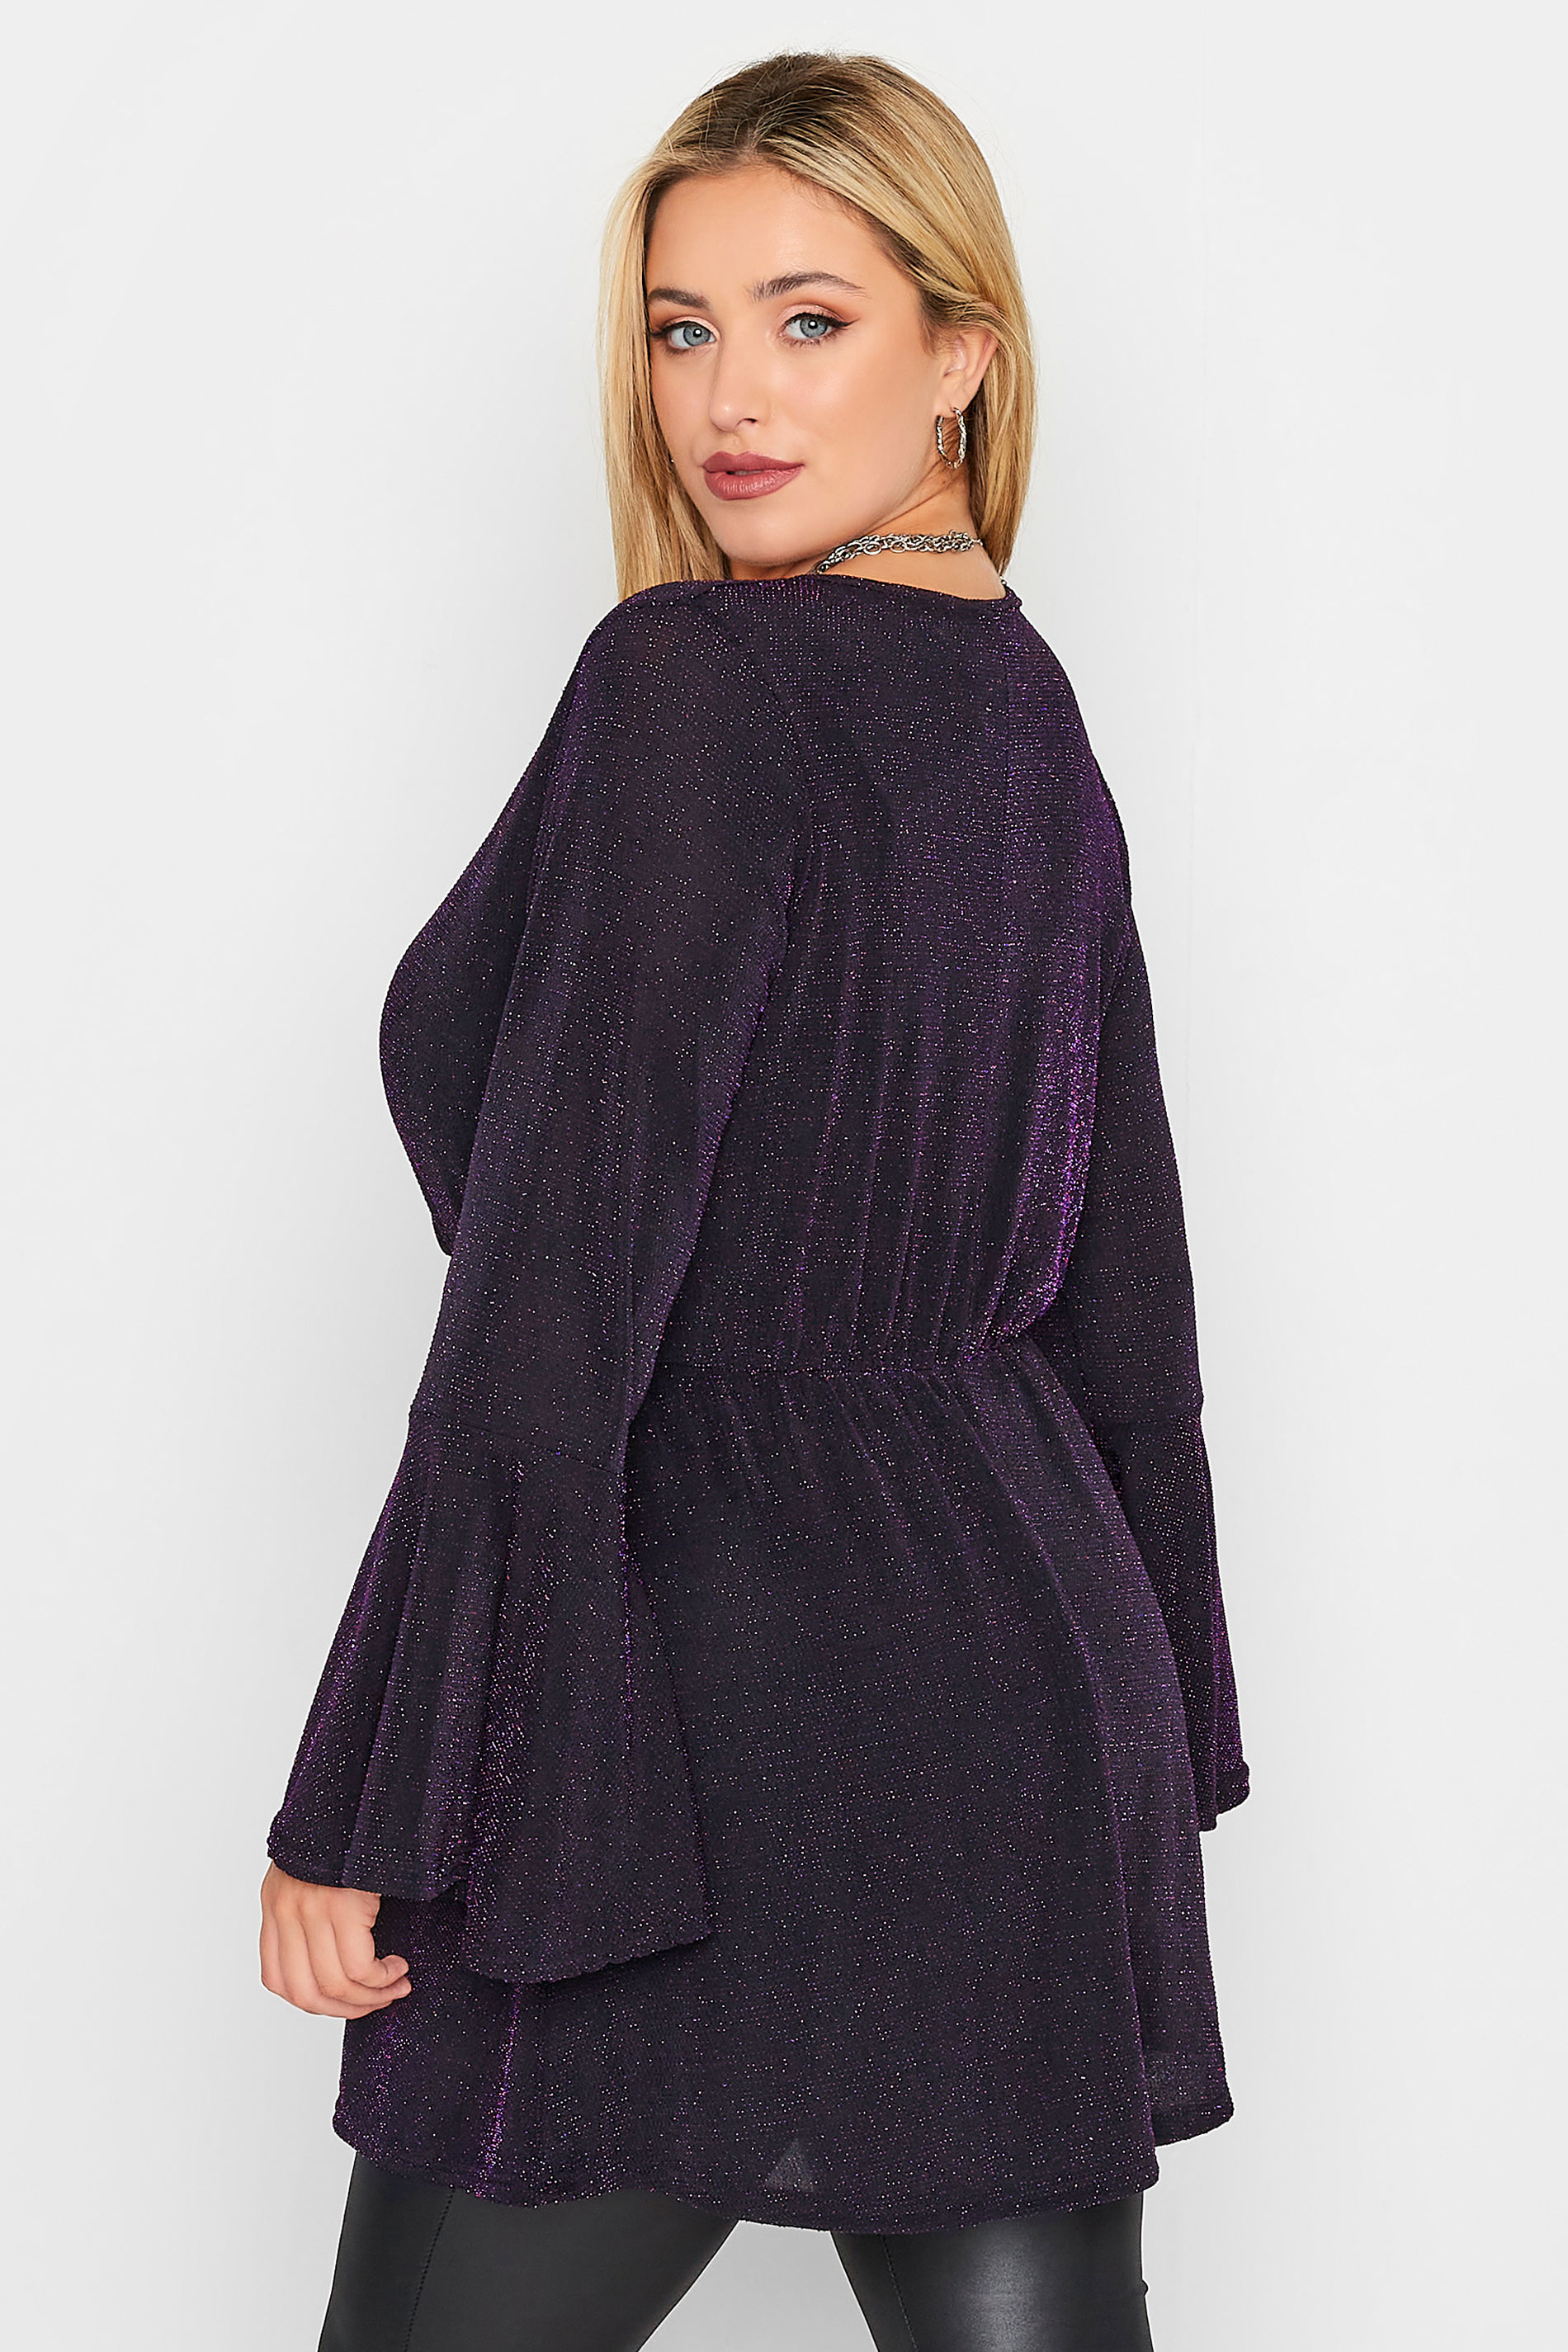 LIMITED COLLECTION Plus Size Purple Glitter Wrap Top | Yours Clothing  3